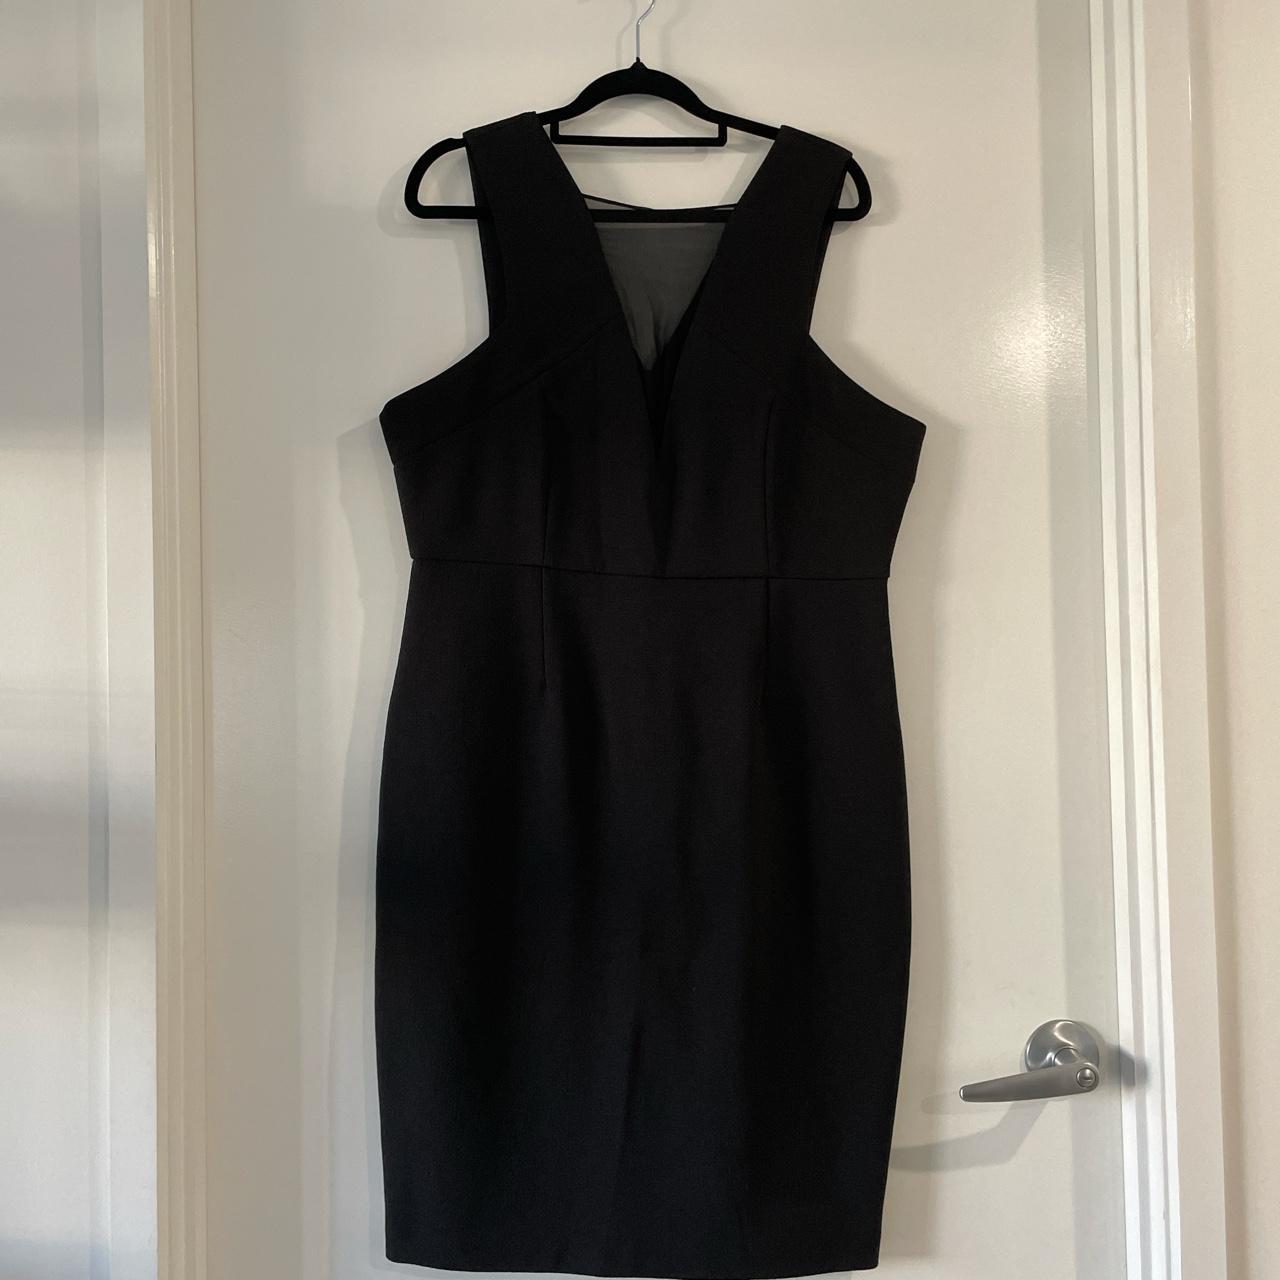 BNWT Tokito Collection Black sheer cut out... - Depop